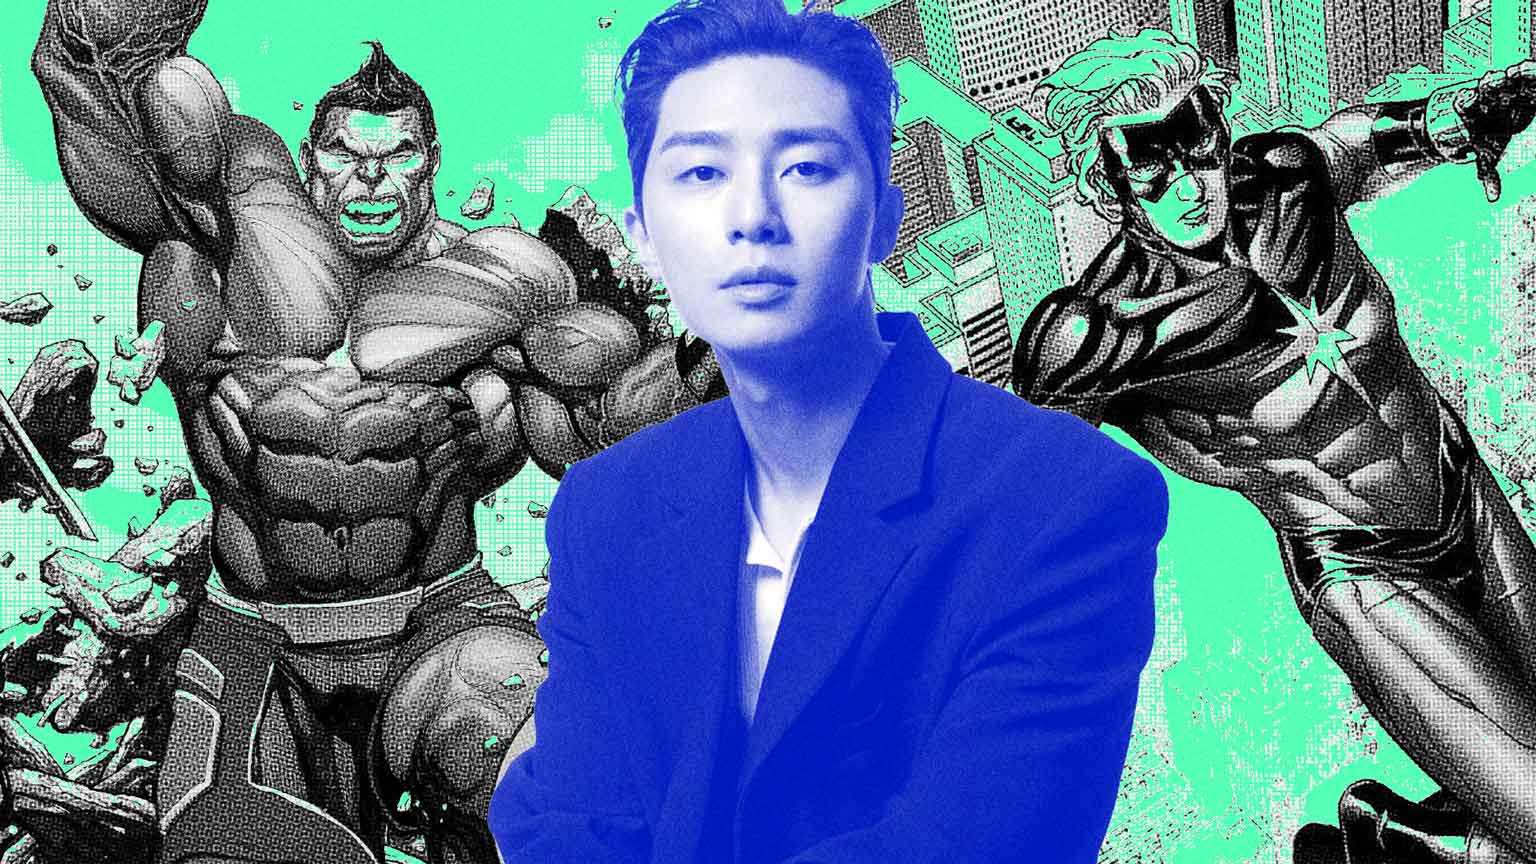 Park Seo-joon May Be In Captain Marvel 2. Here’s Who He Could Play